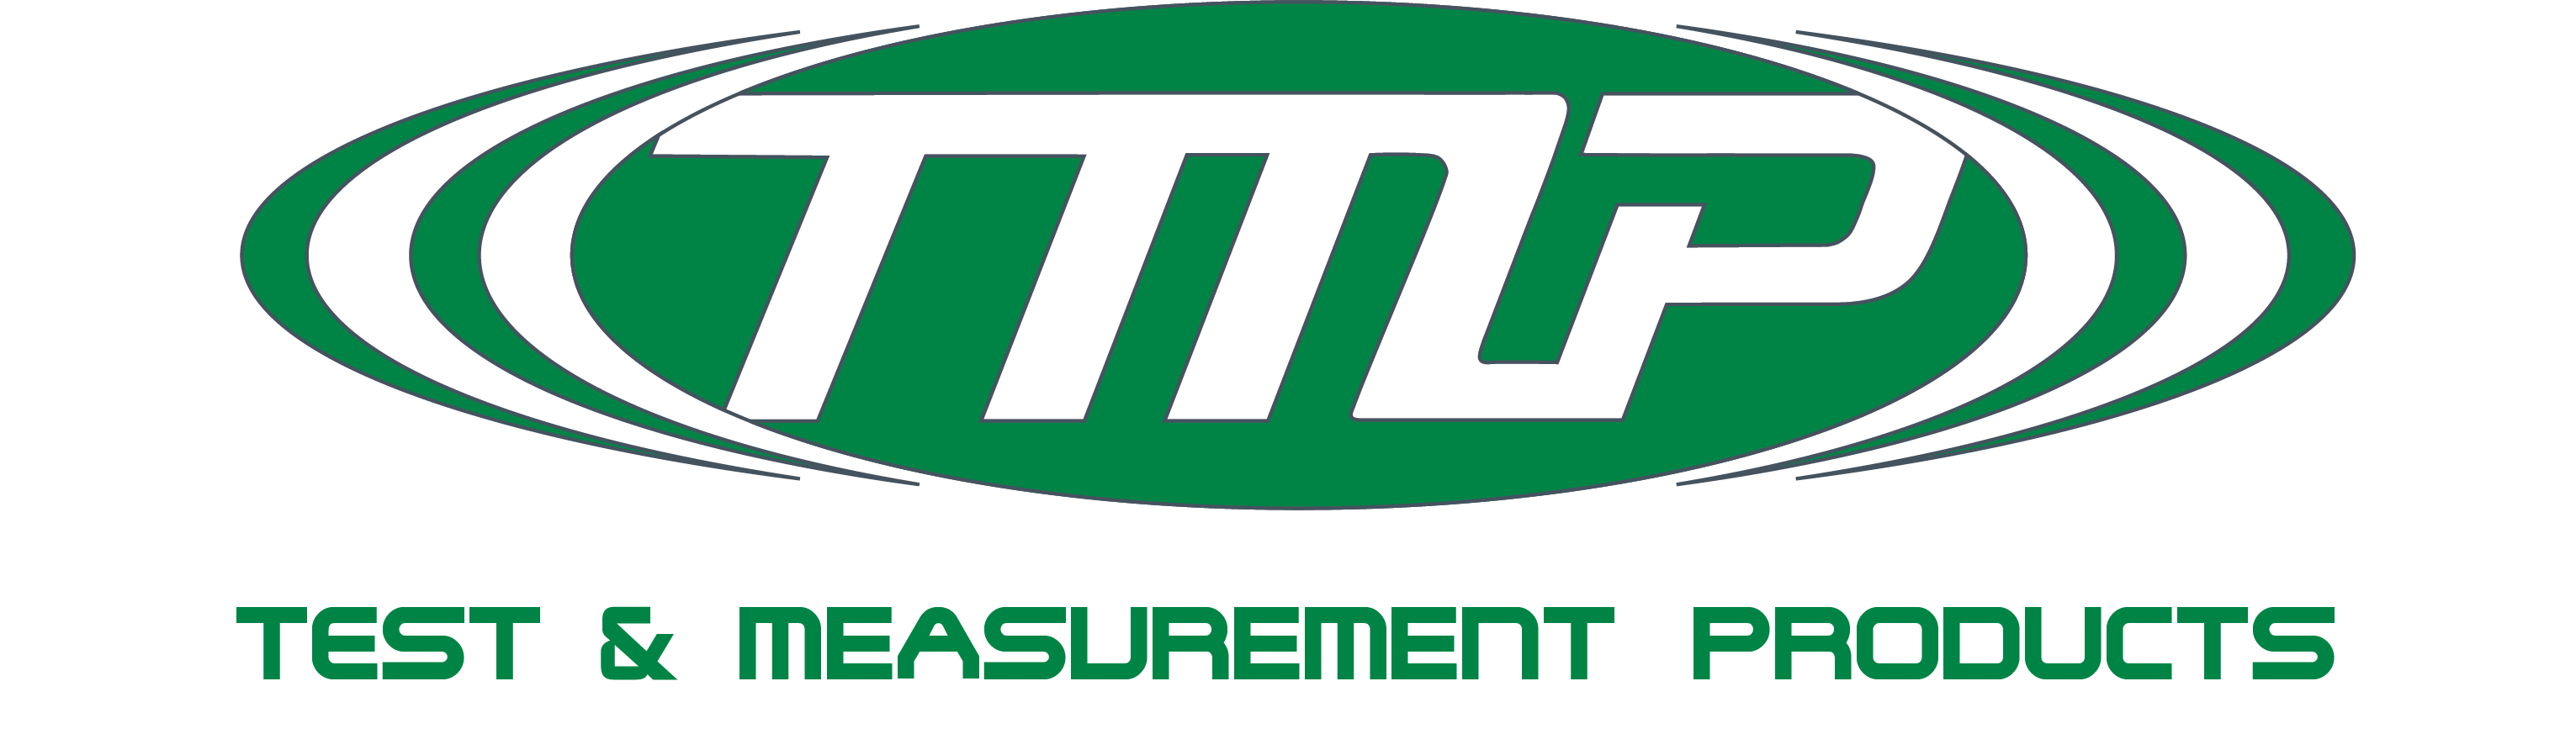 Green TMP line logo with test and measurement products tagline underneath